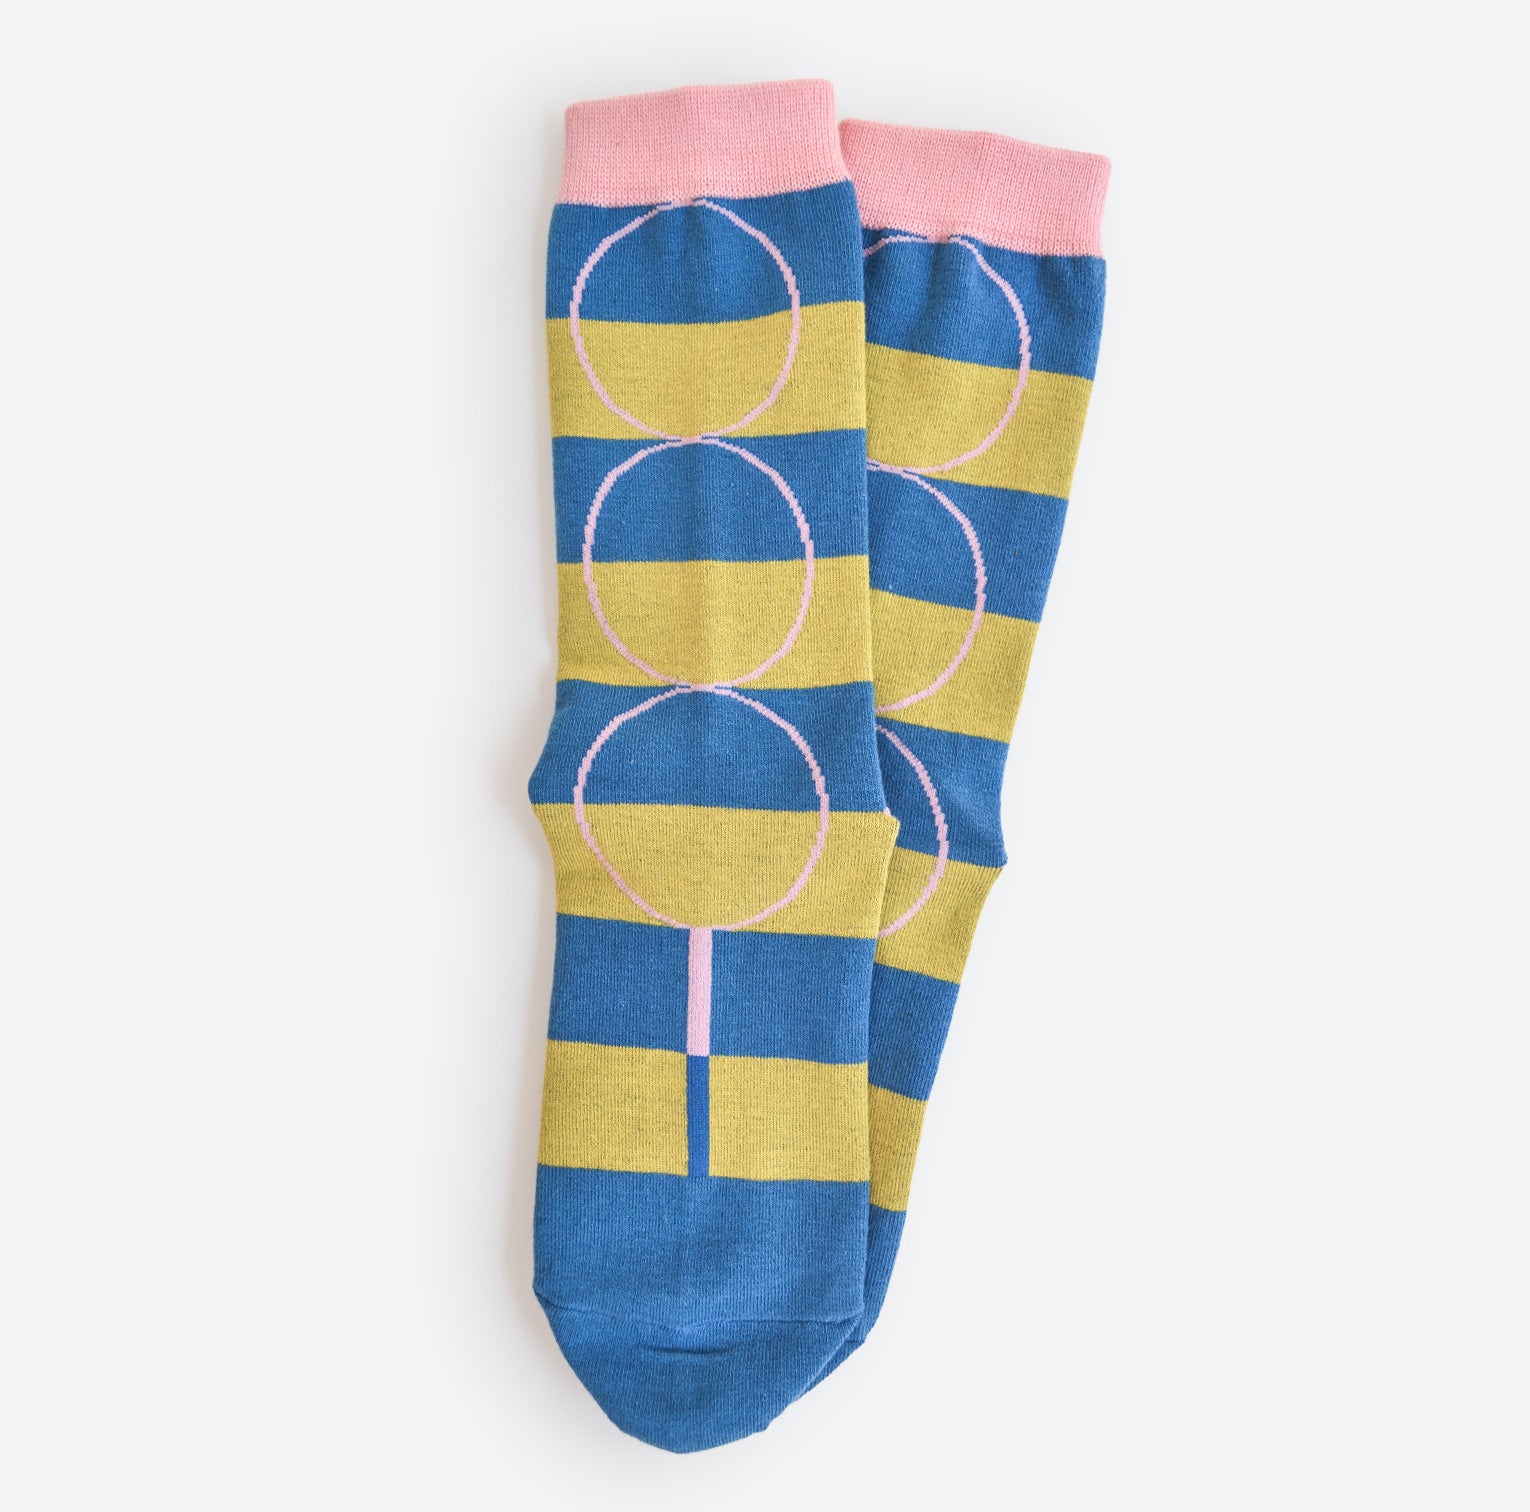 Hooray Sock Co. Polk Blue and Green Stripe Crew Socks. Groovy striped design with big circles. Crew length, 80% cotton, 20% spandex. Sizes: Large (US men’s 8-12), Small (US women&#39;s 4-10). 